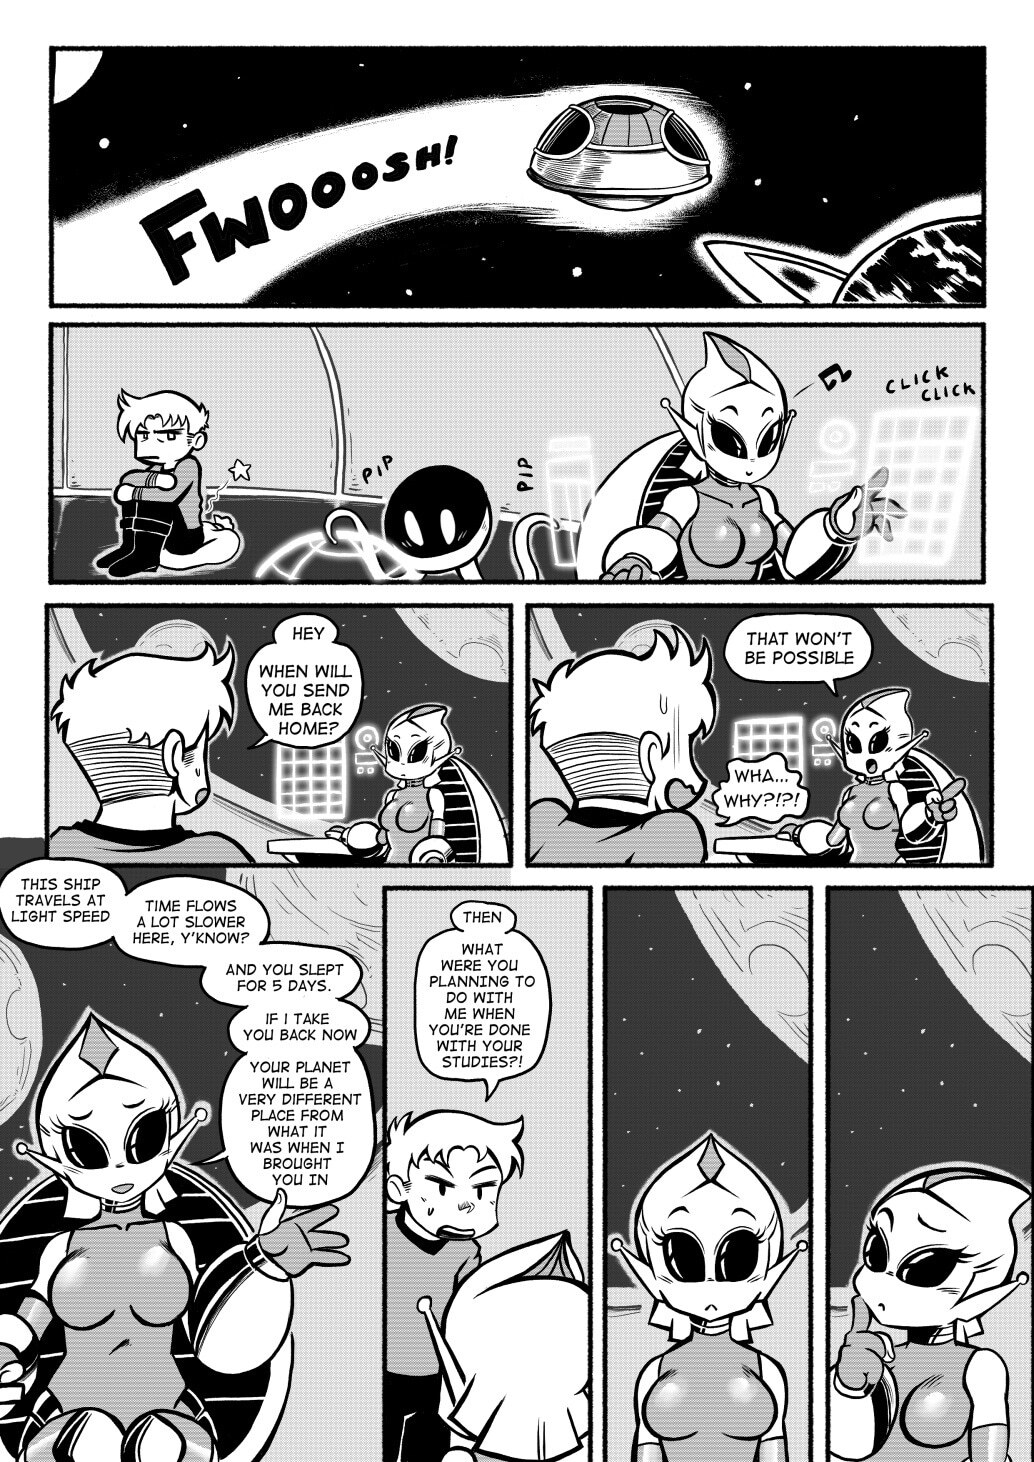 Abducted! - Mr.E - Page 9